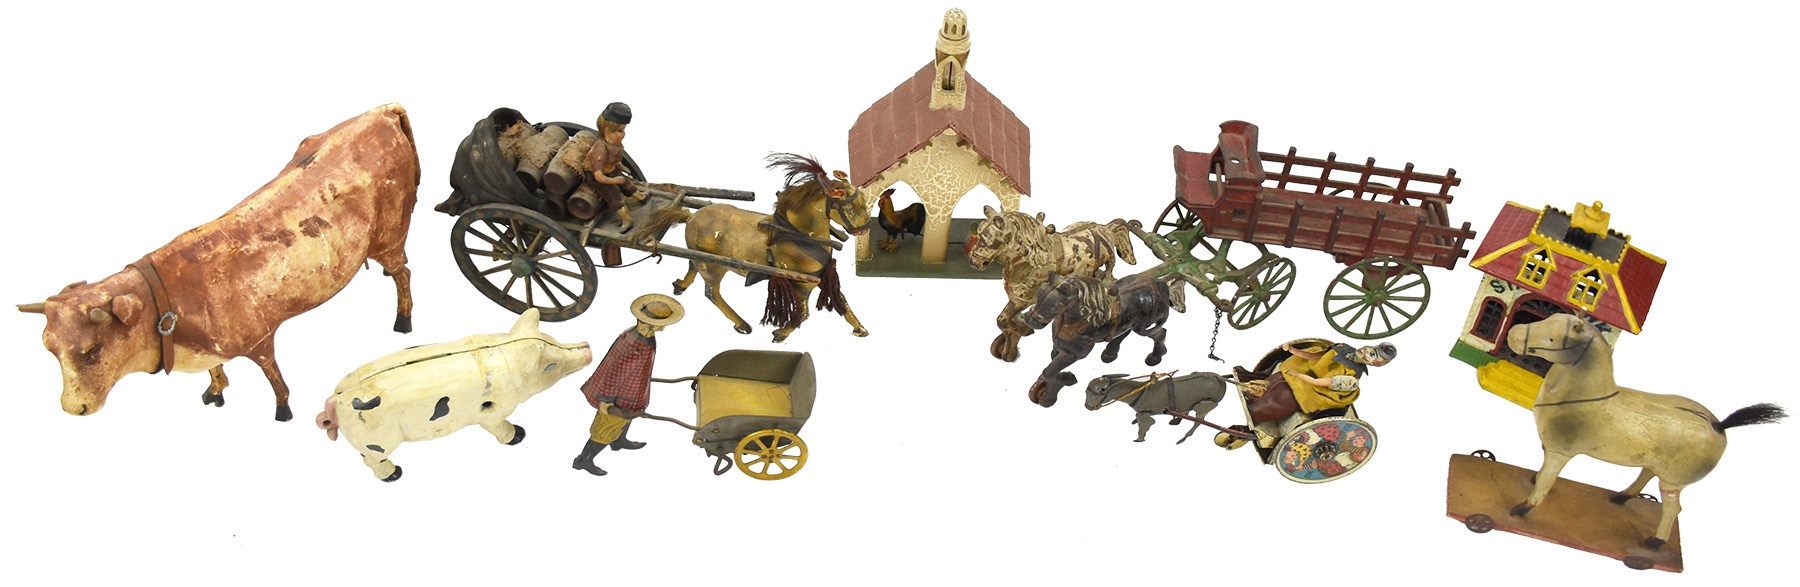 Rock And Pop Culture - 19th & Early 20th Century Toys from Prominent American Family